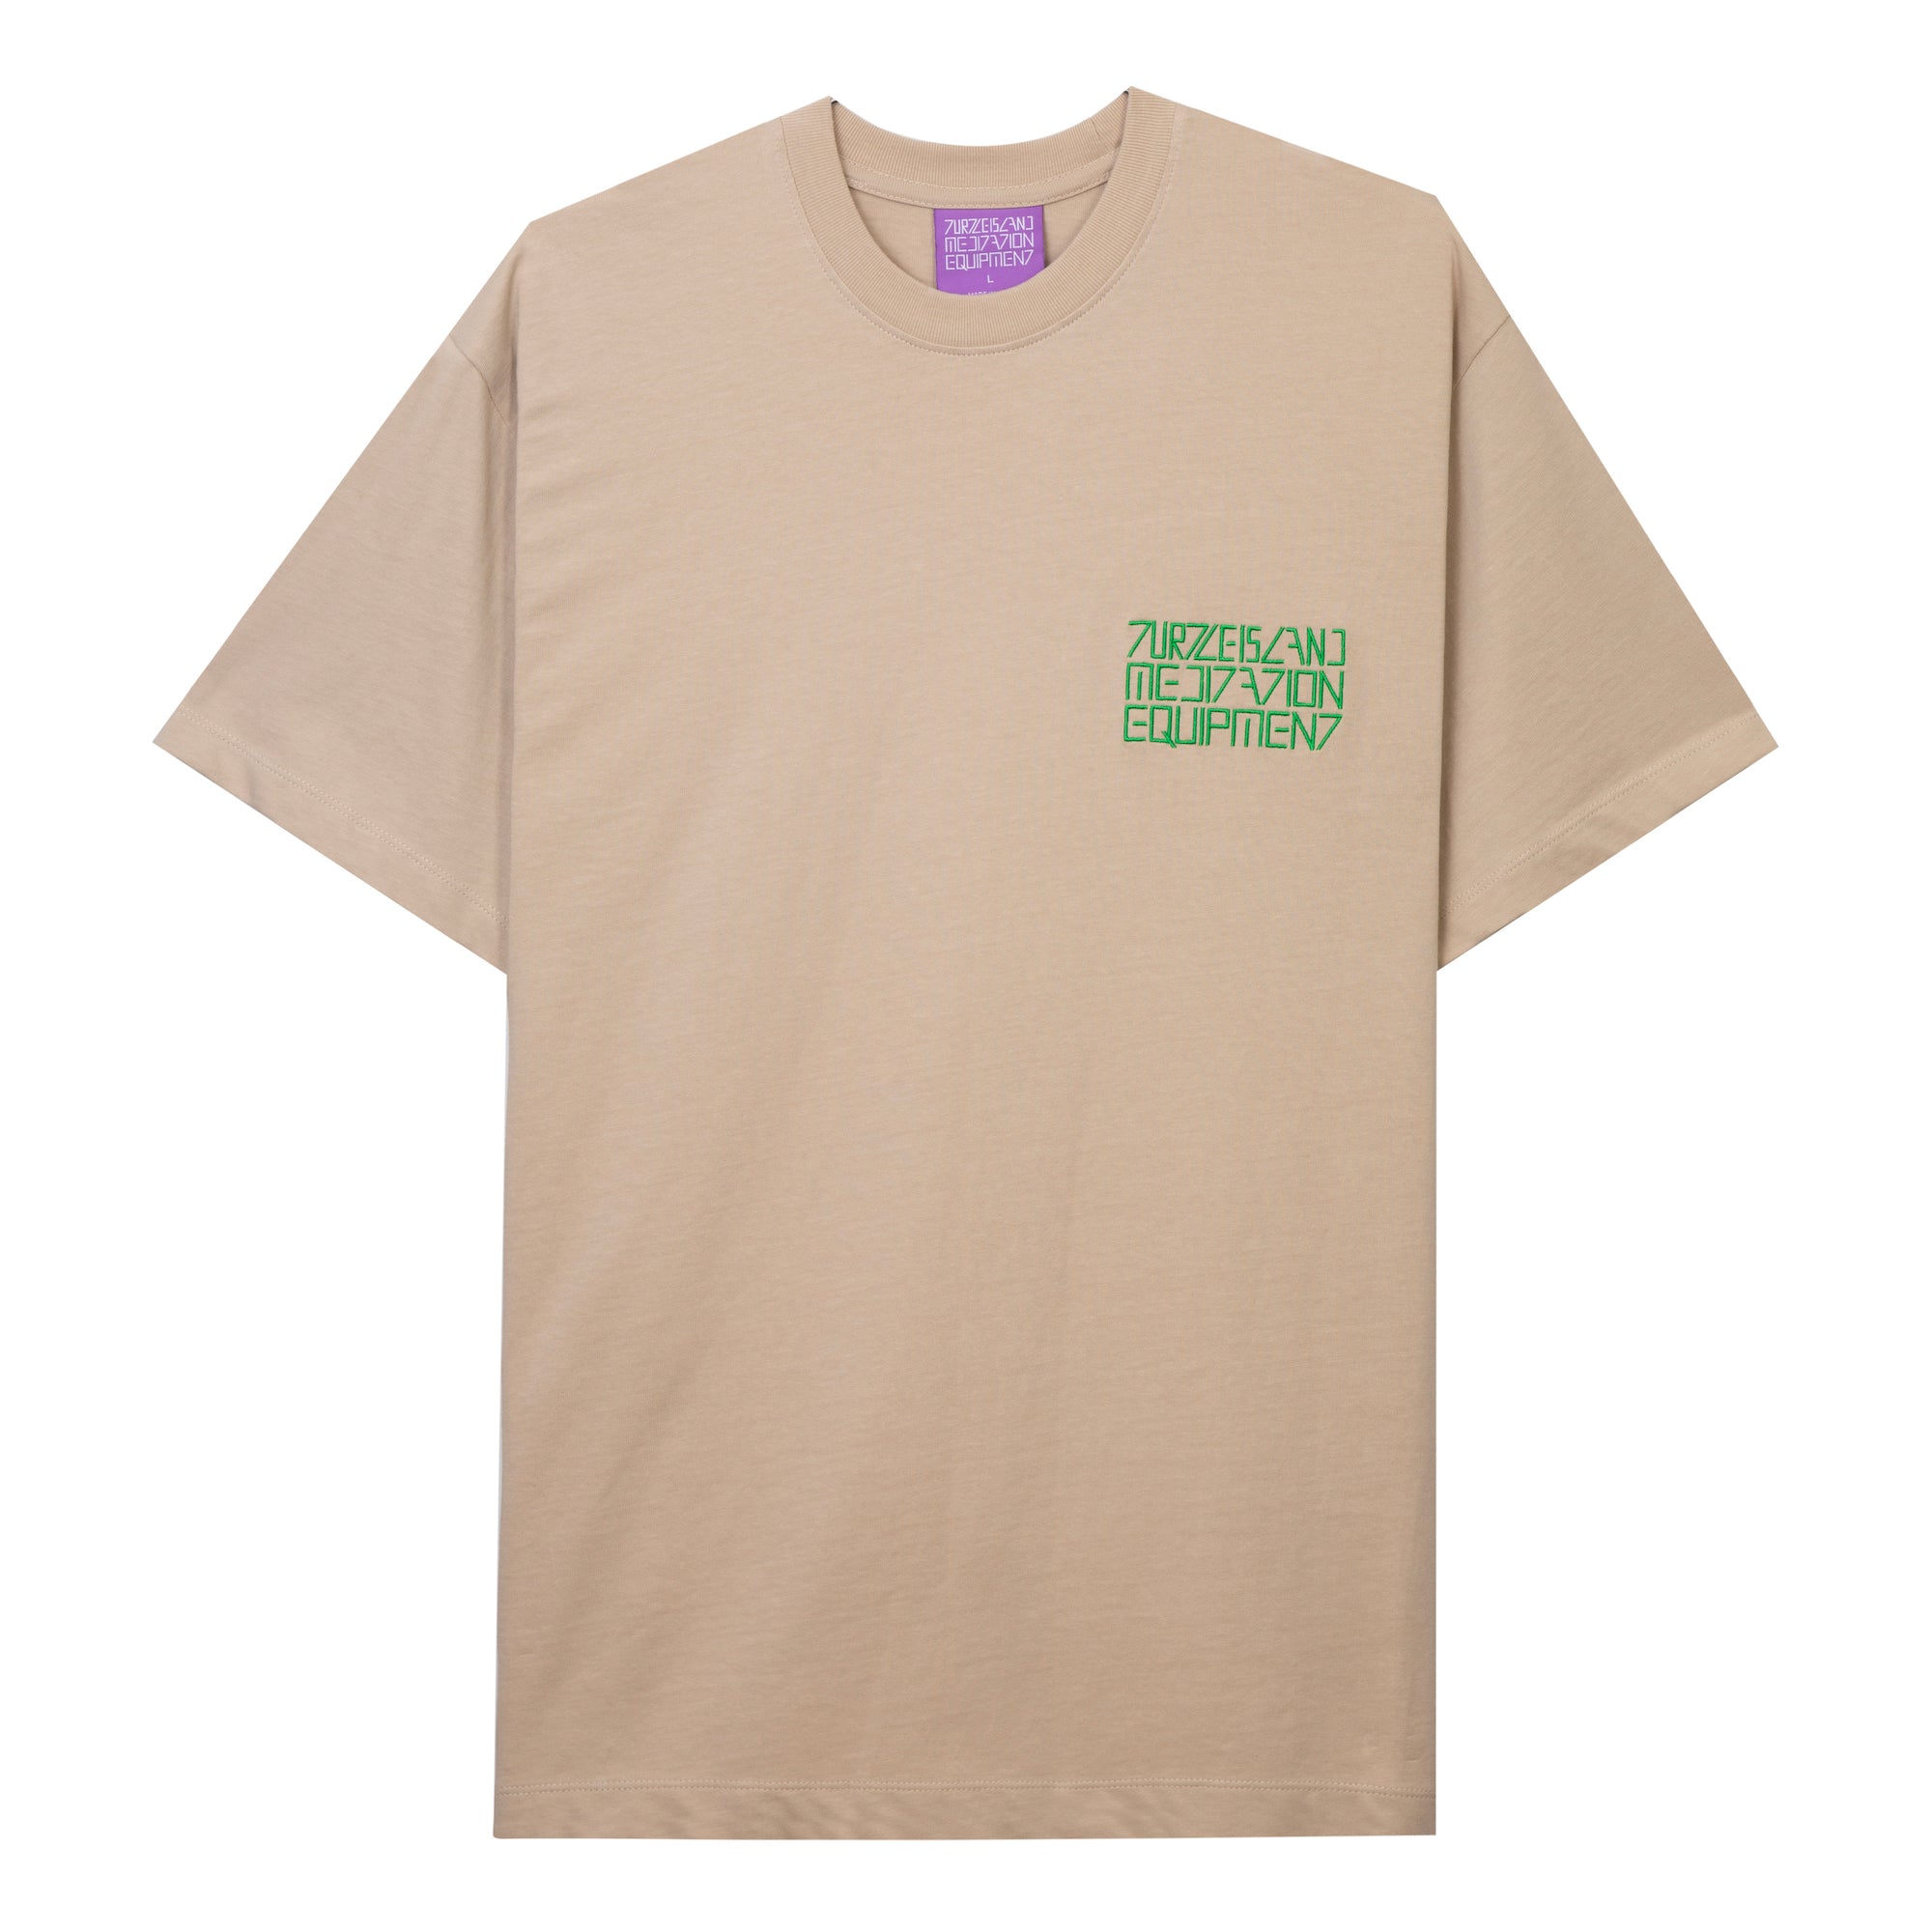 Future Time Zone SS Tee - Beige